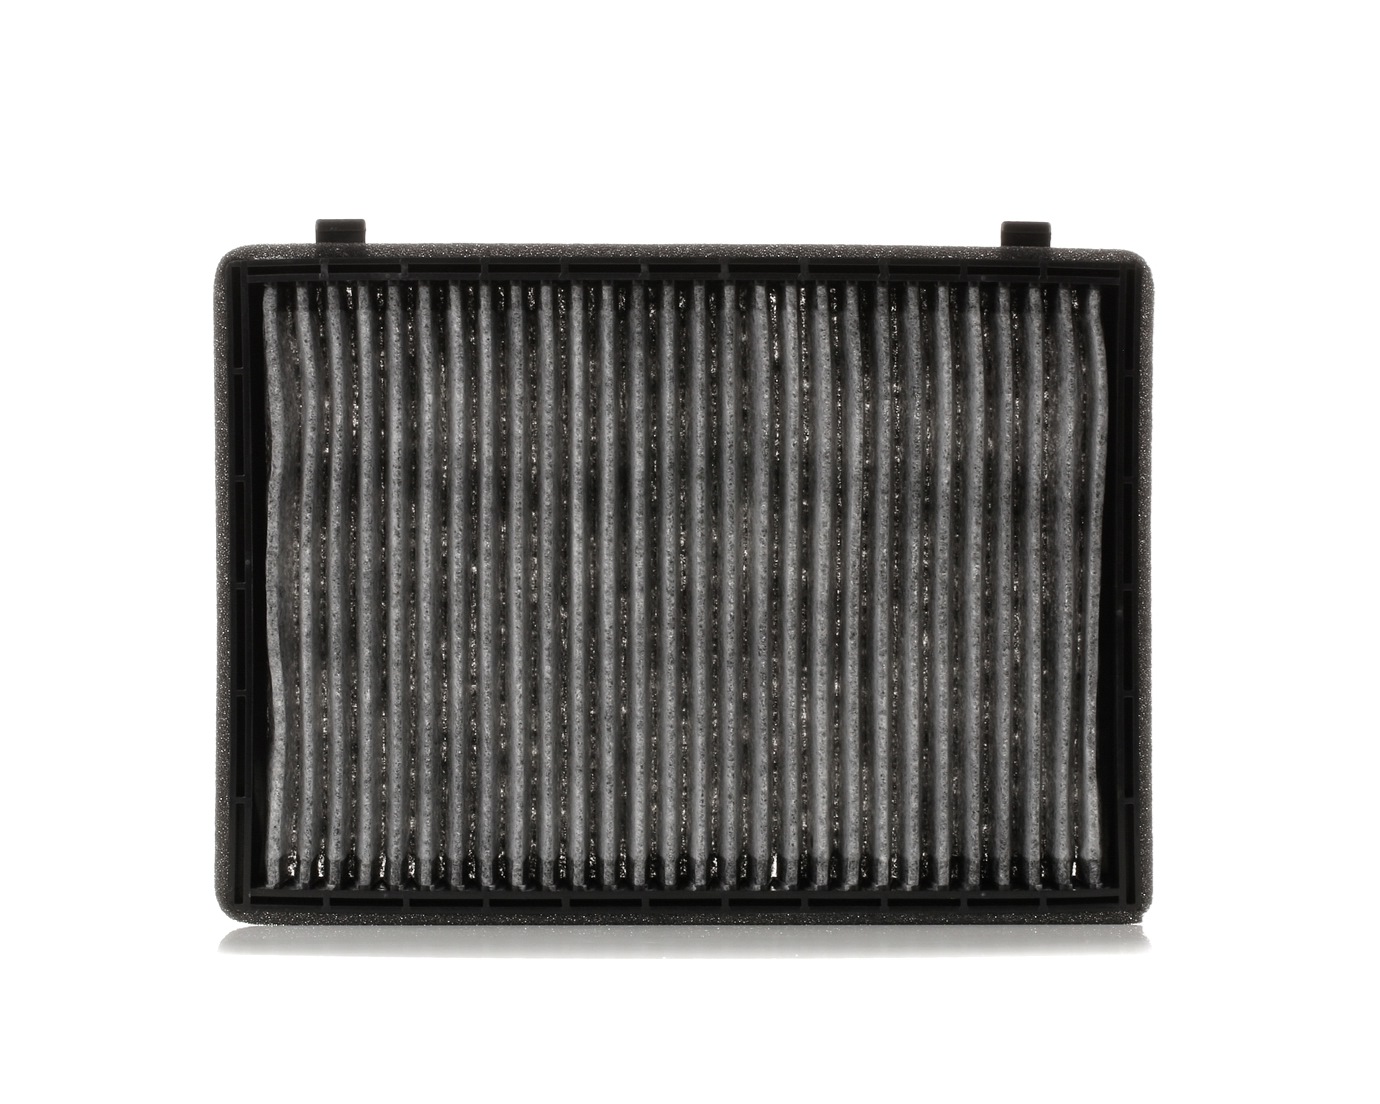 STARK Activated Carbon Filter, 265 mm x 190 mm x 27 mm Width: 190mm, Height: 27mm, Length: 265mm Cabin filter SKIF-0170264 buy